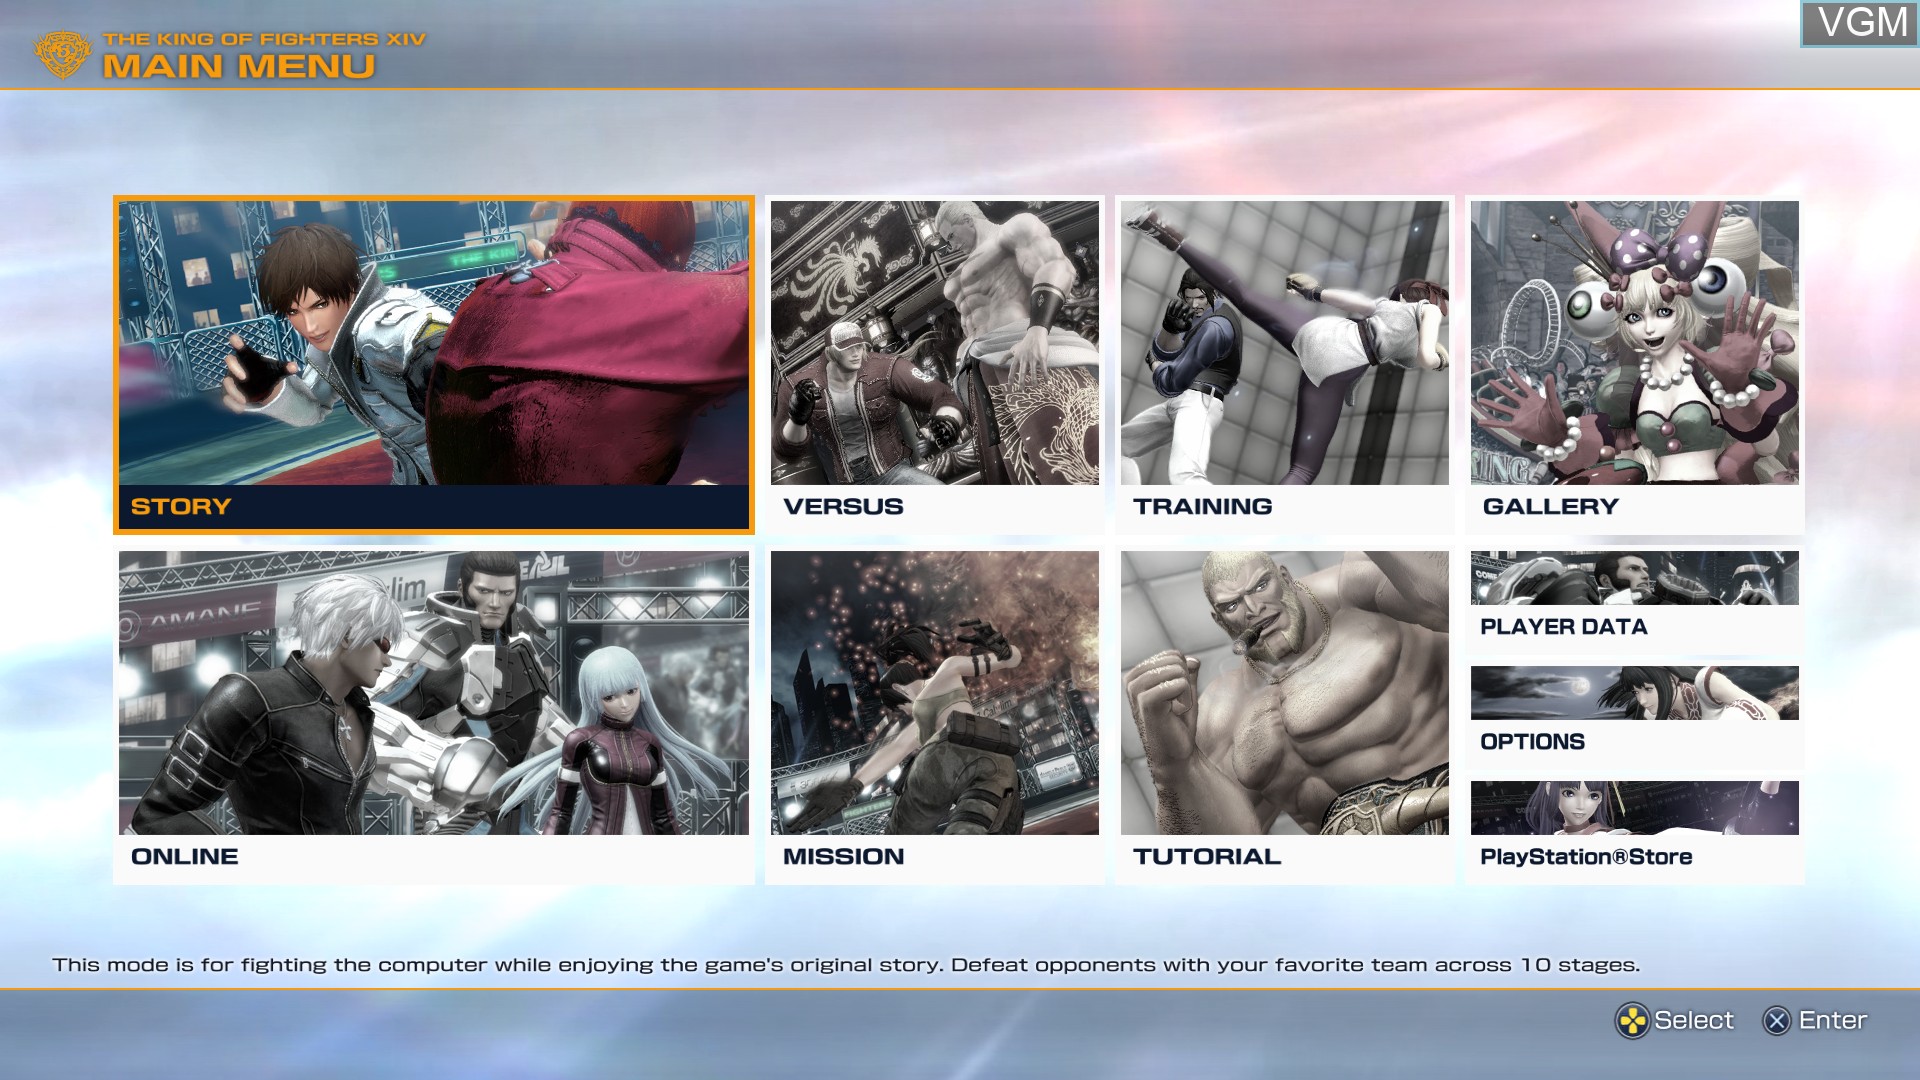 Menu screen of the game King of Fighters XIV, The on Sony Playstation 4